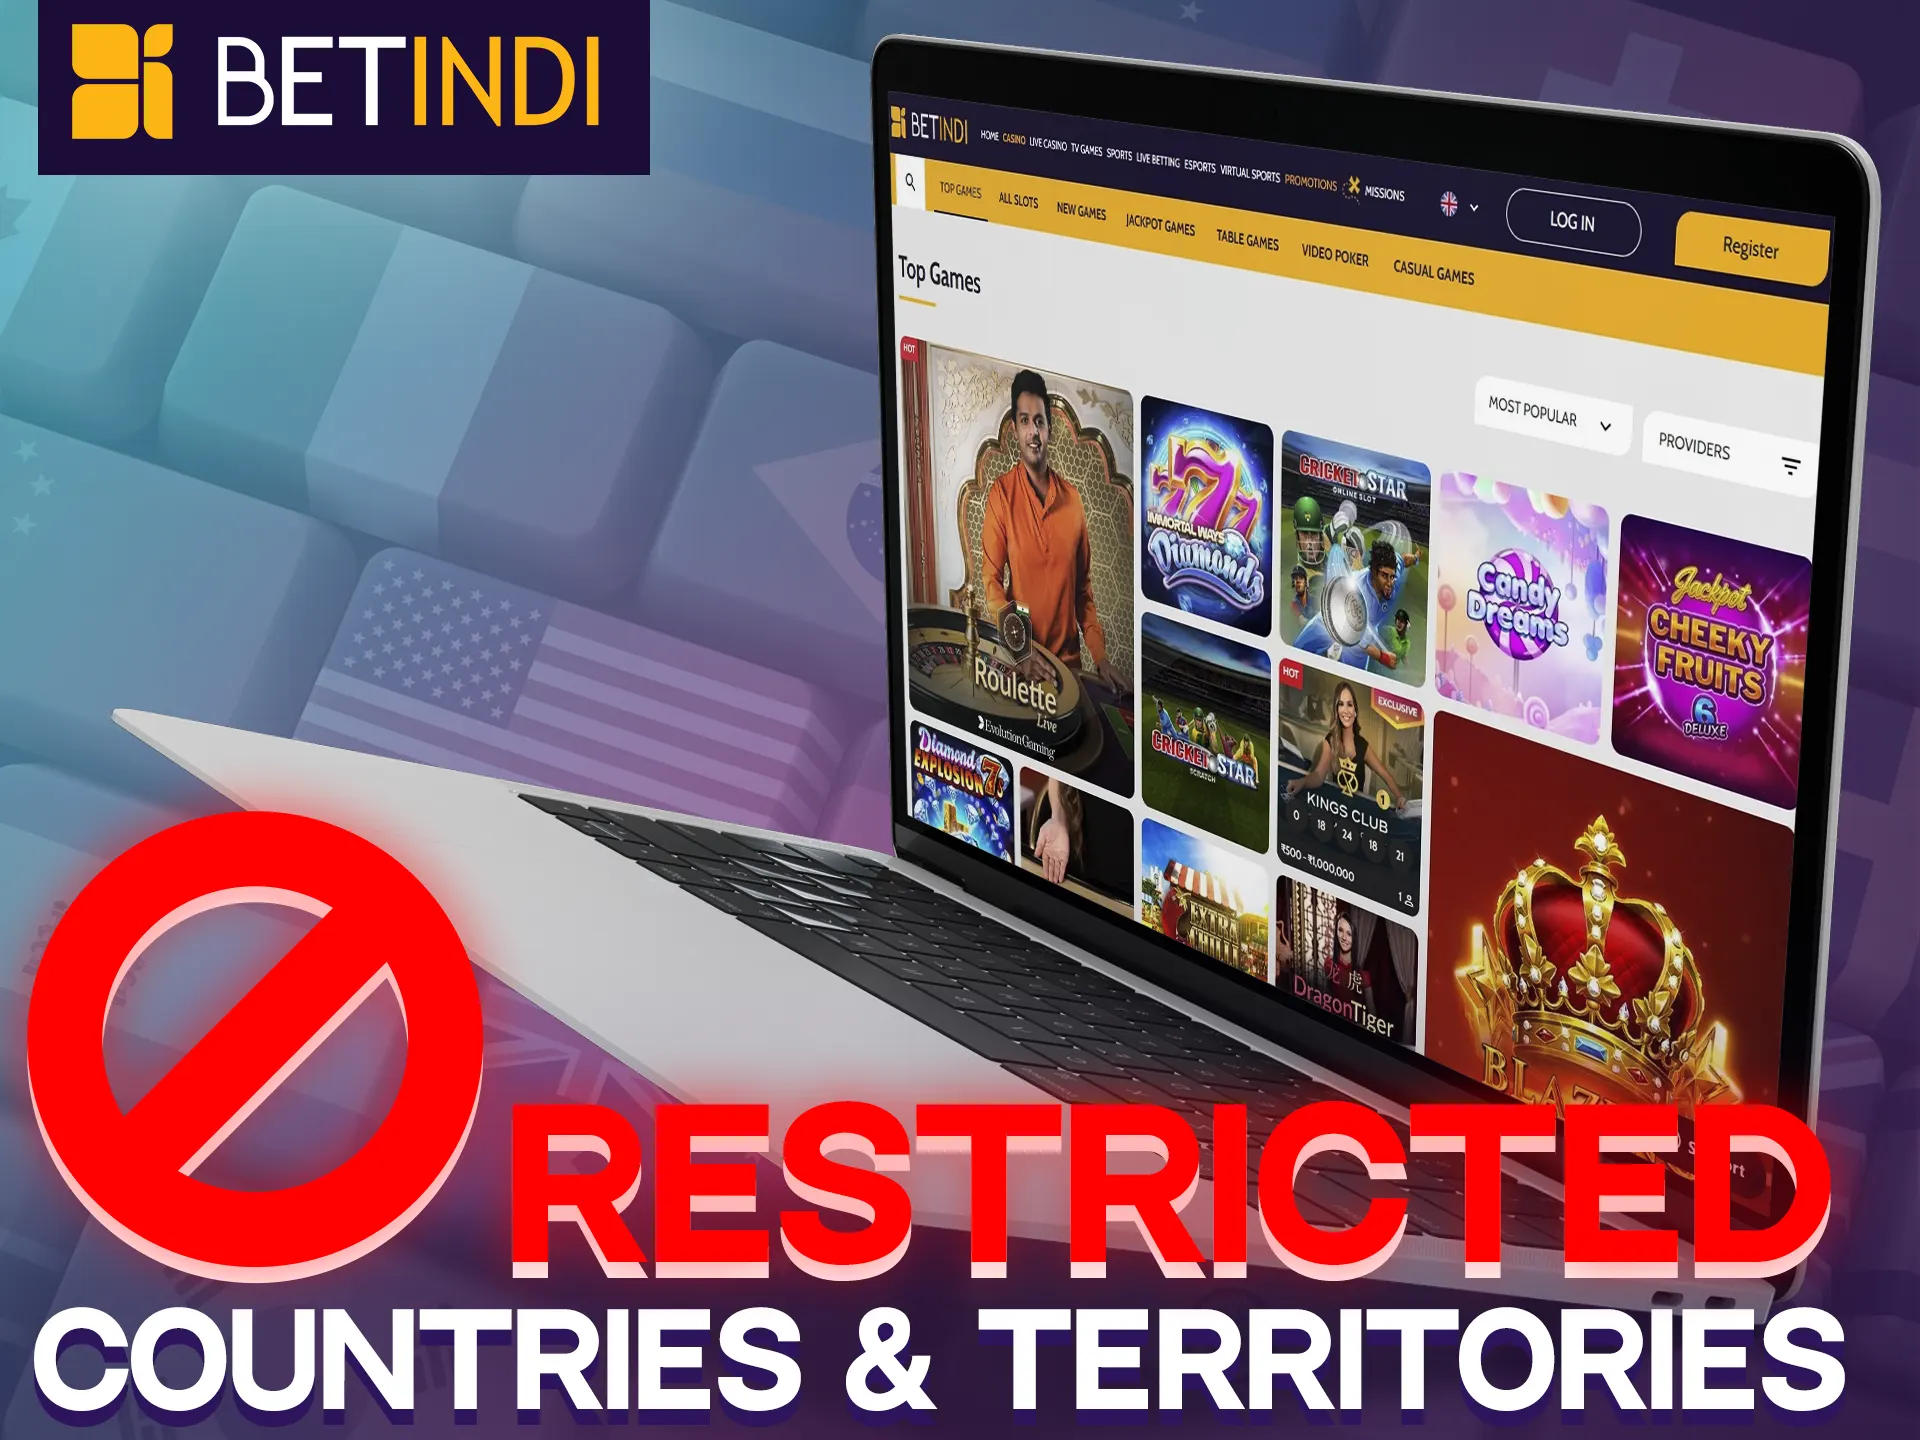 Betindi Casino is unavailable in certain countries.